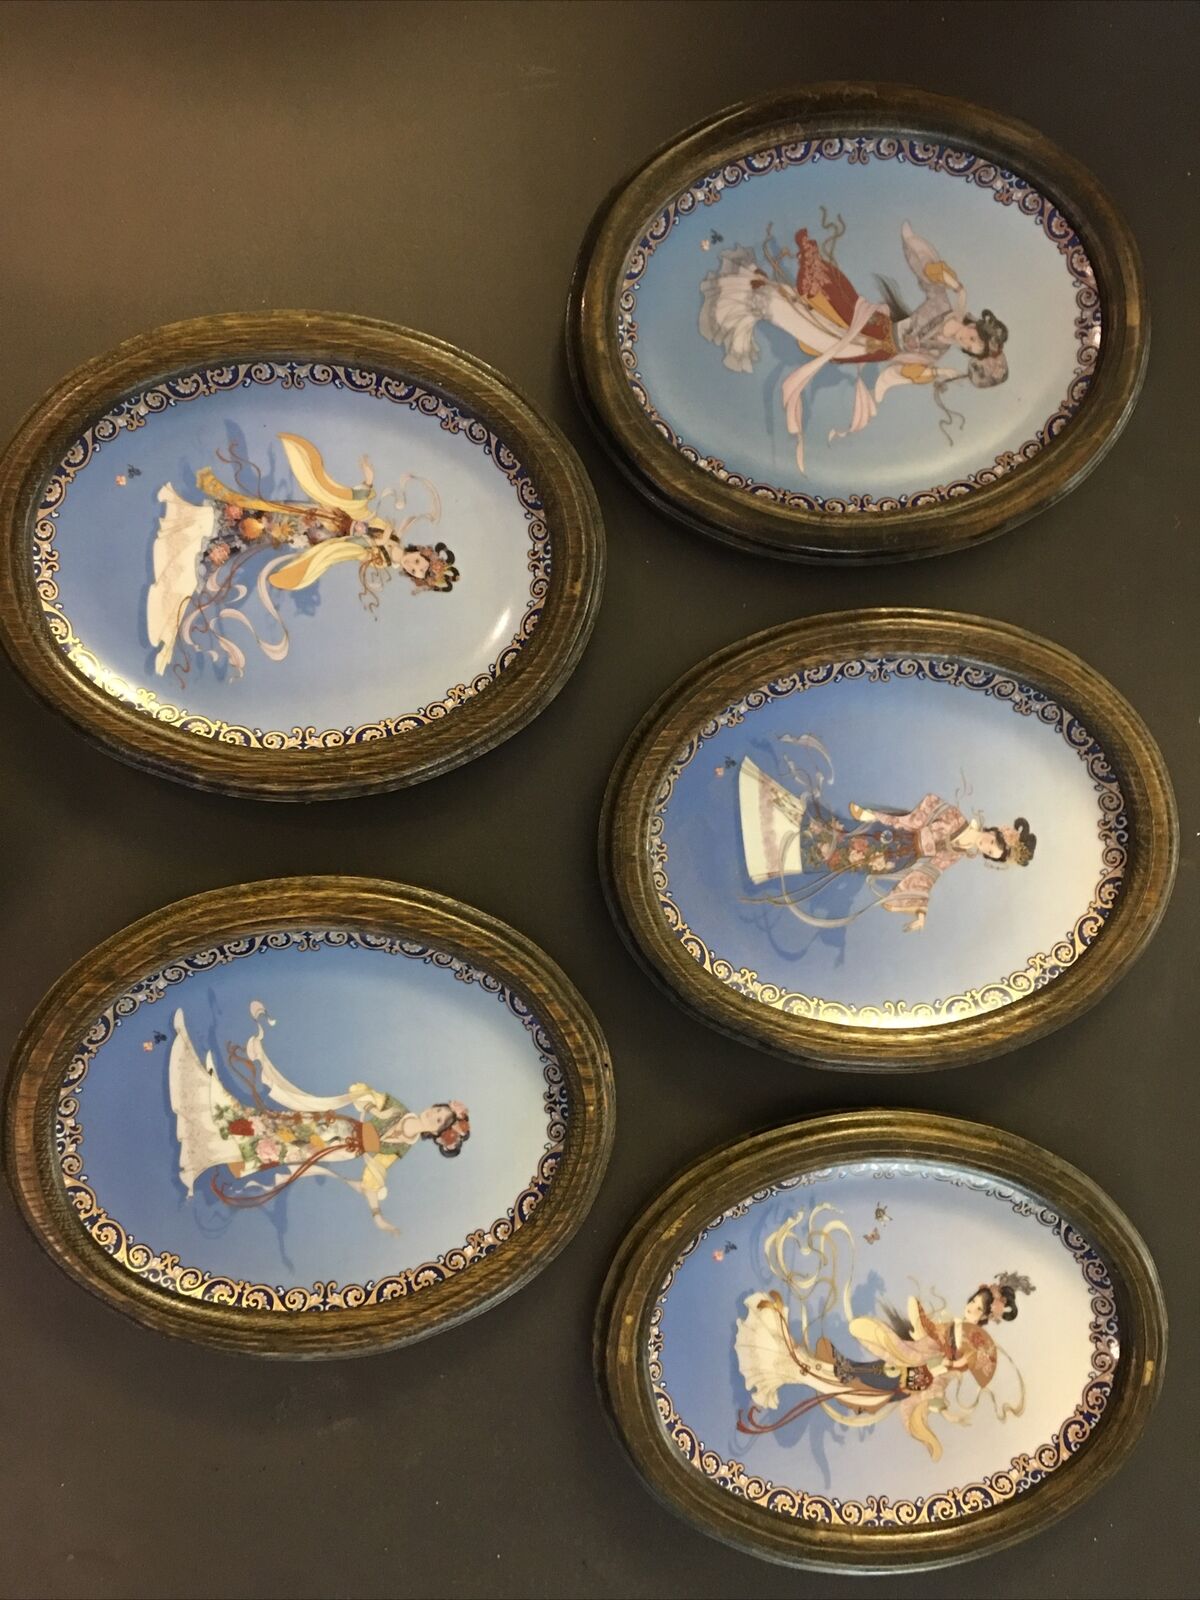 DREAM OF THE RED CHAMBER LOT of 5 Collectible Plates JIANG XUE BING 22K Gold Bradford Exchange